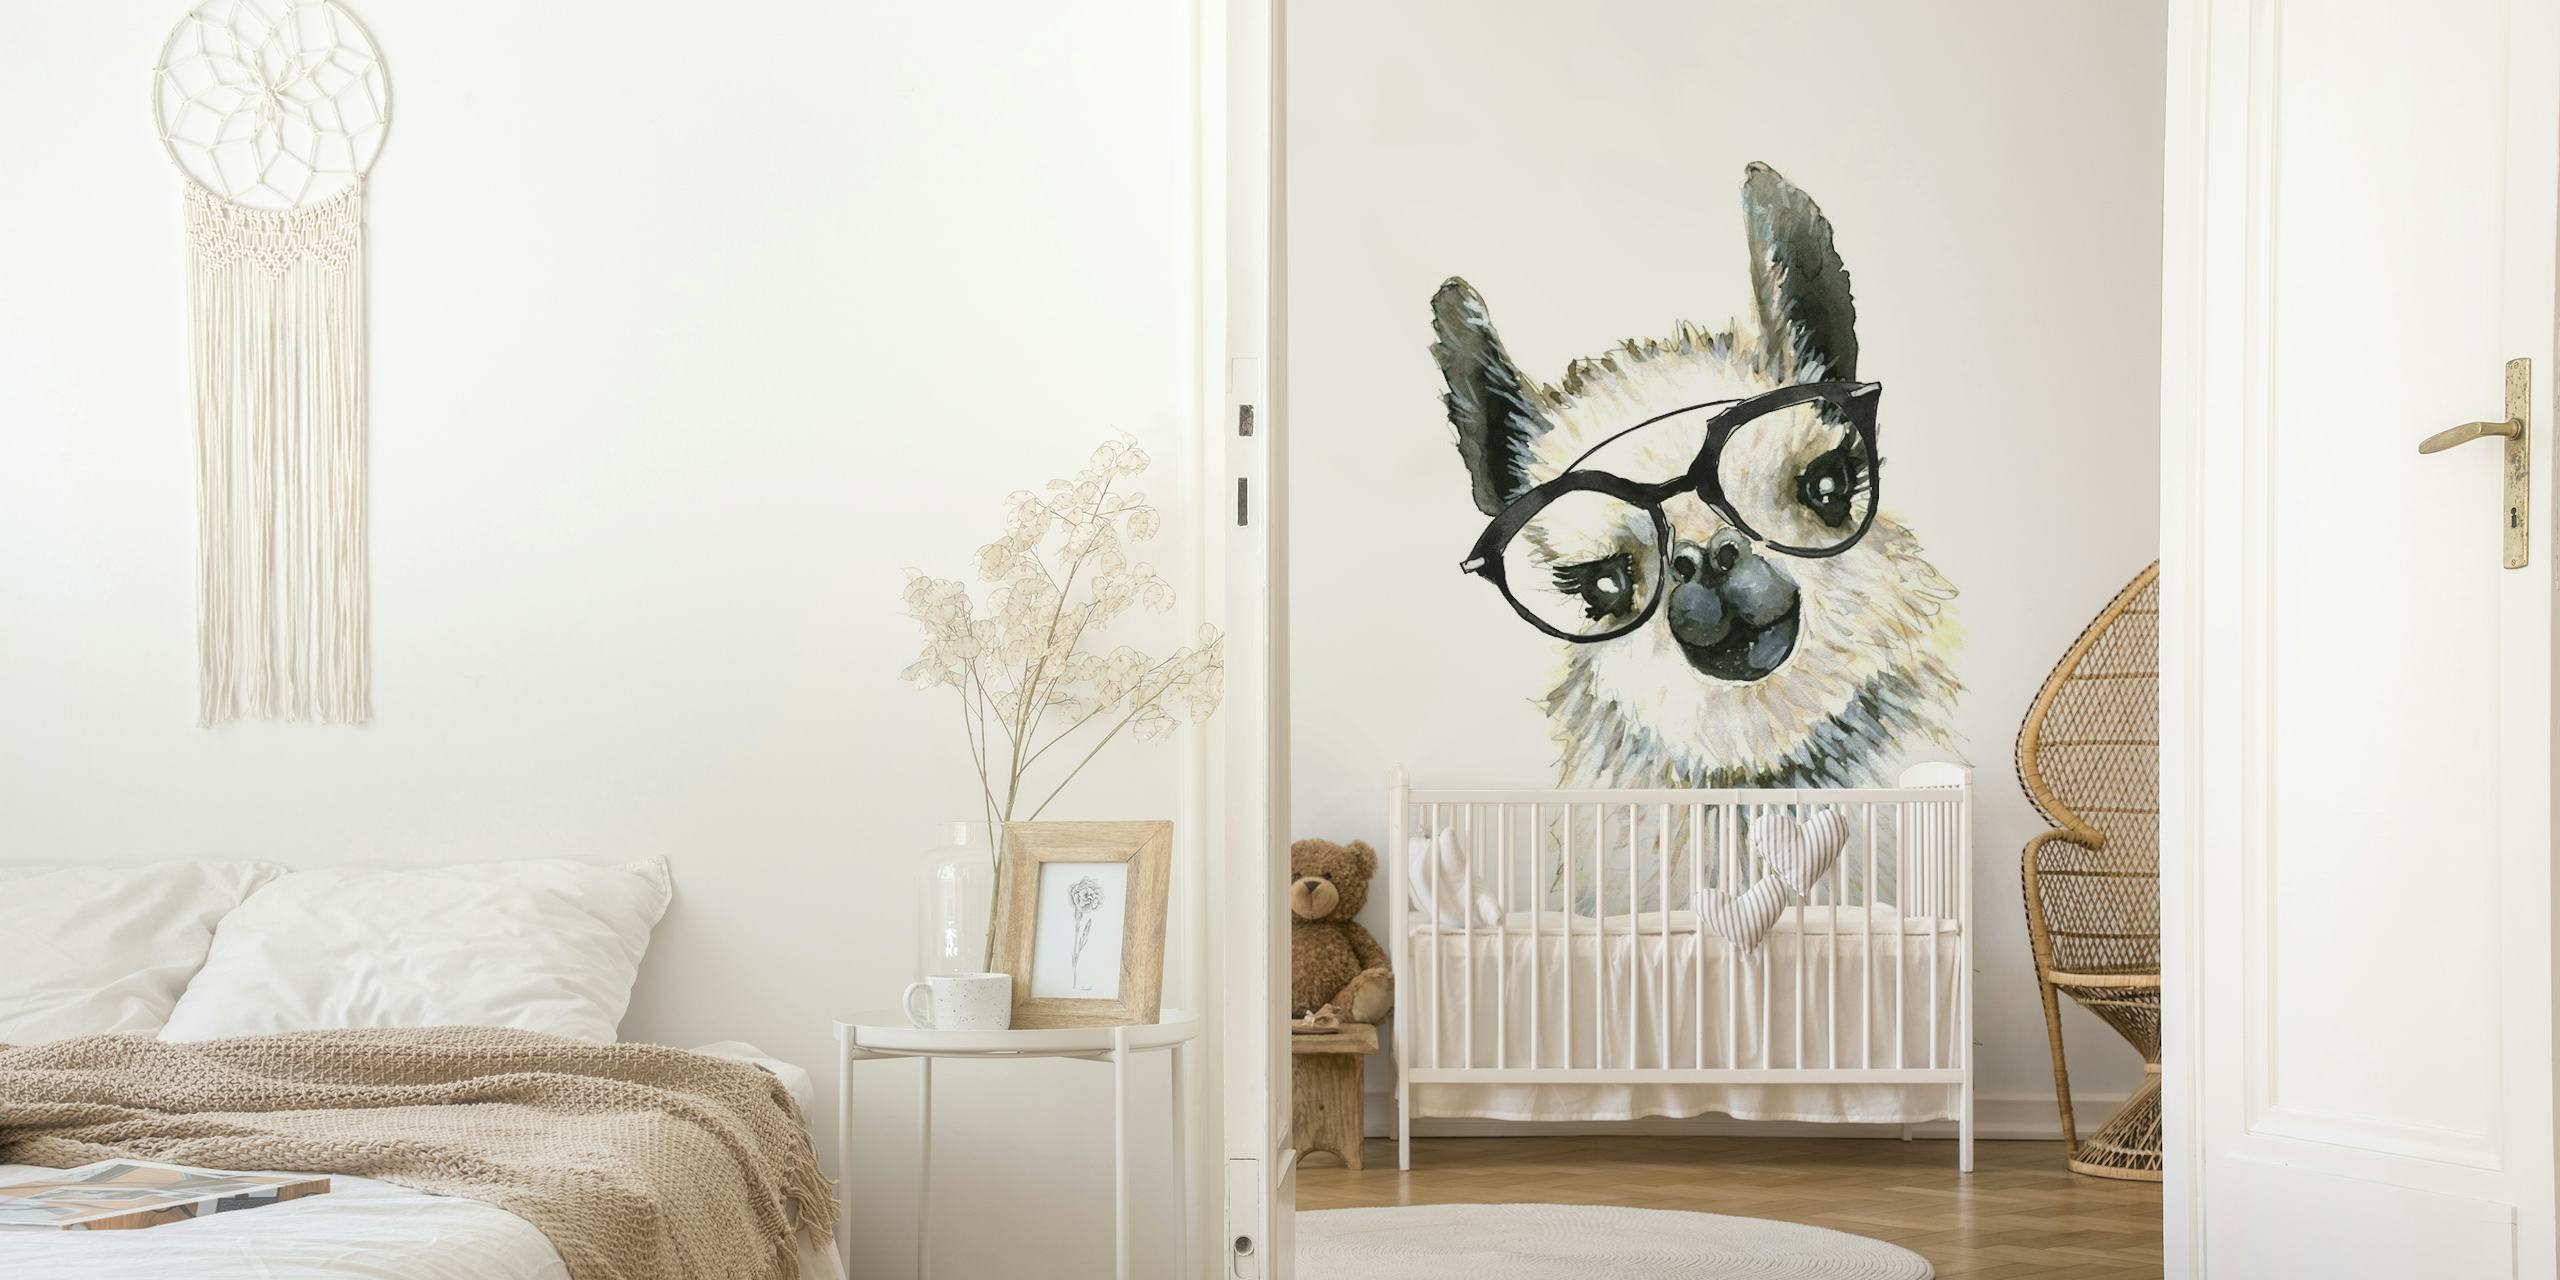 Watercolor illustration of a llama wearing glasses on a wall mural.